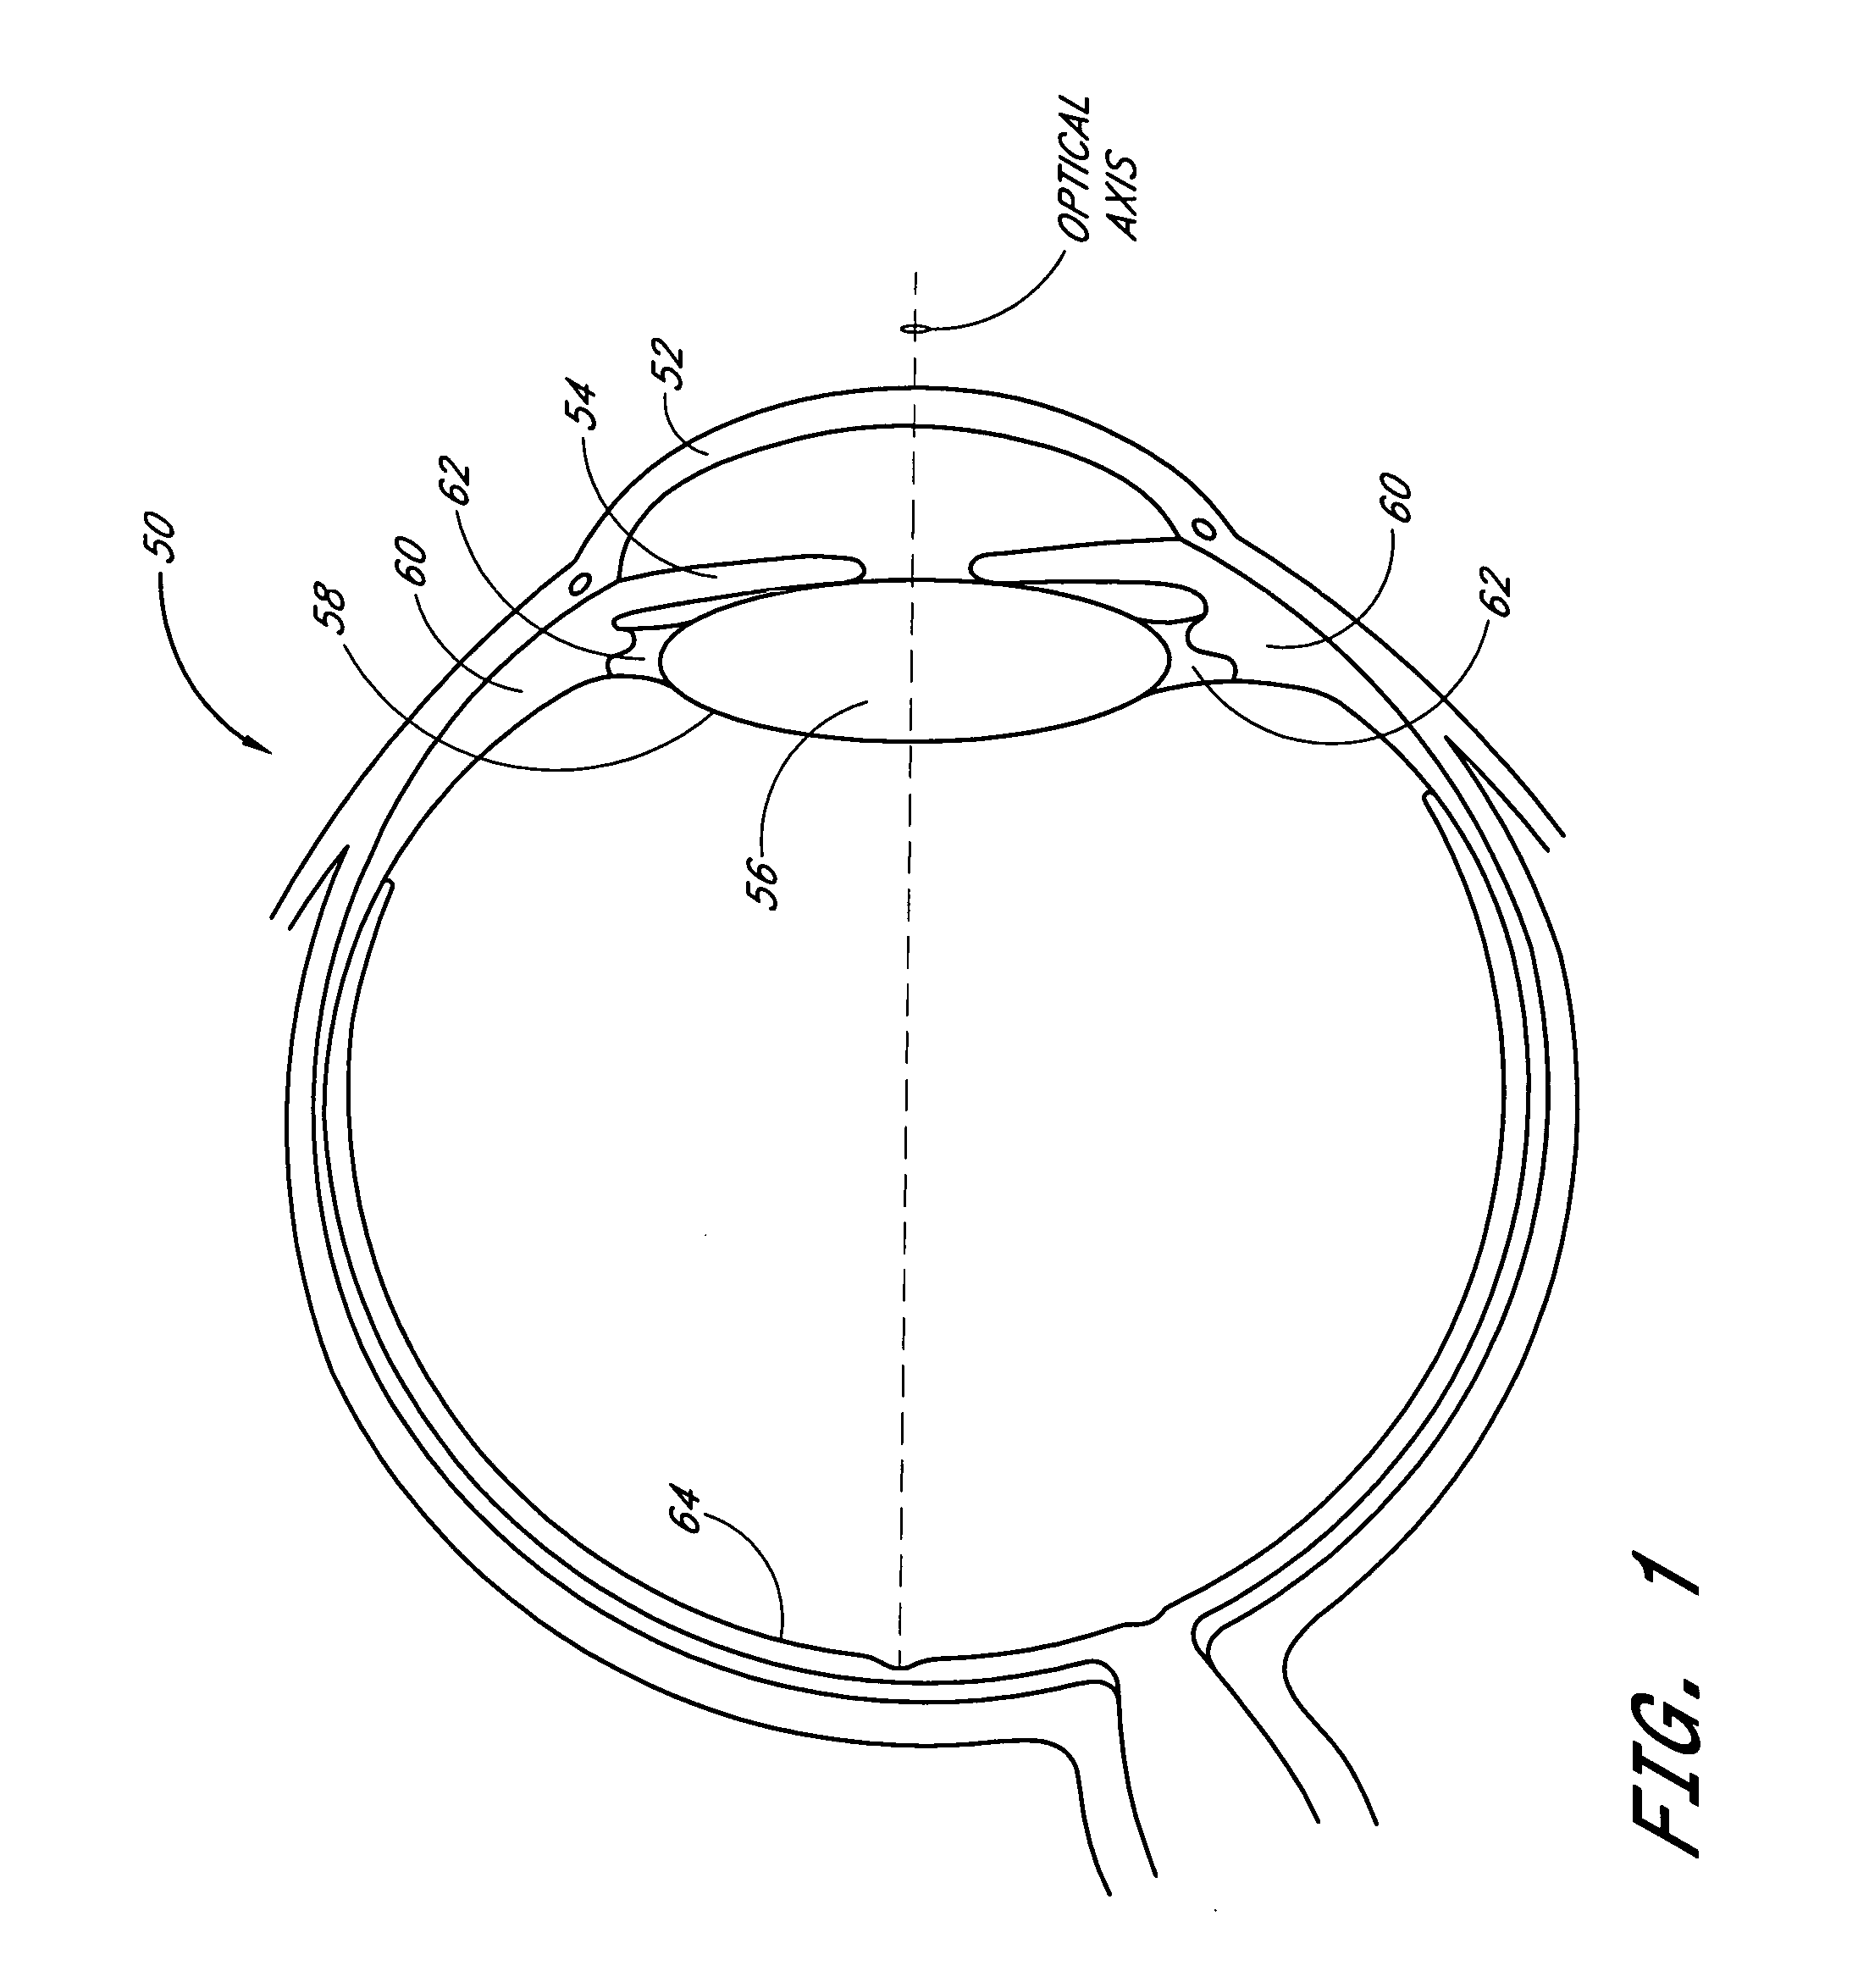 Accommodating intraocular lens system with separation member